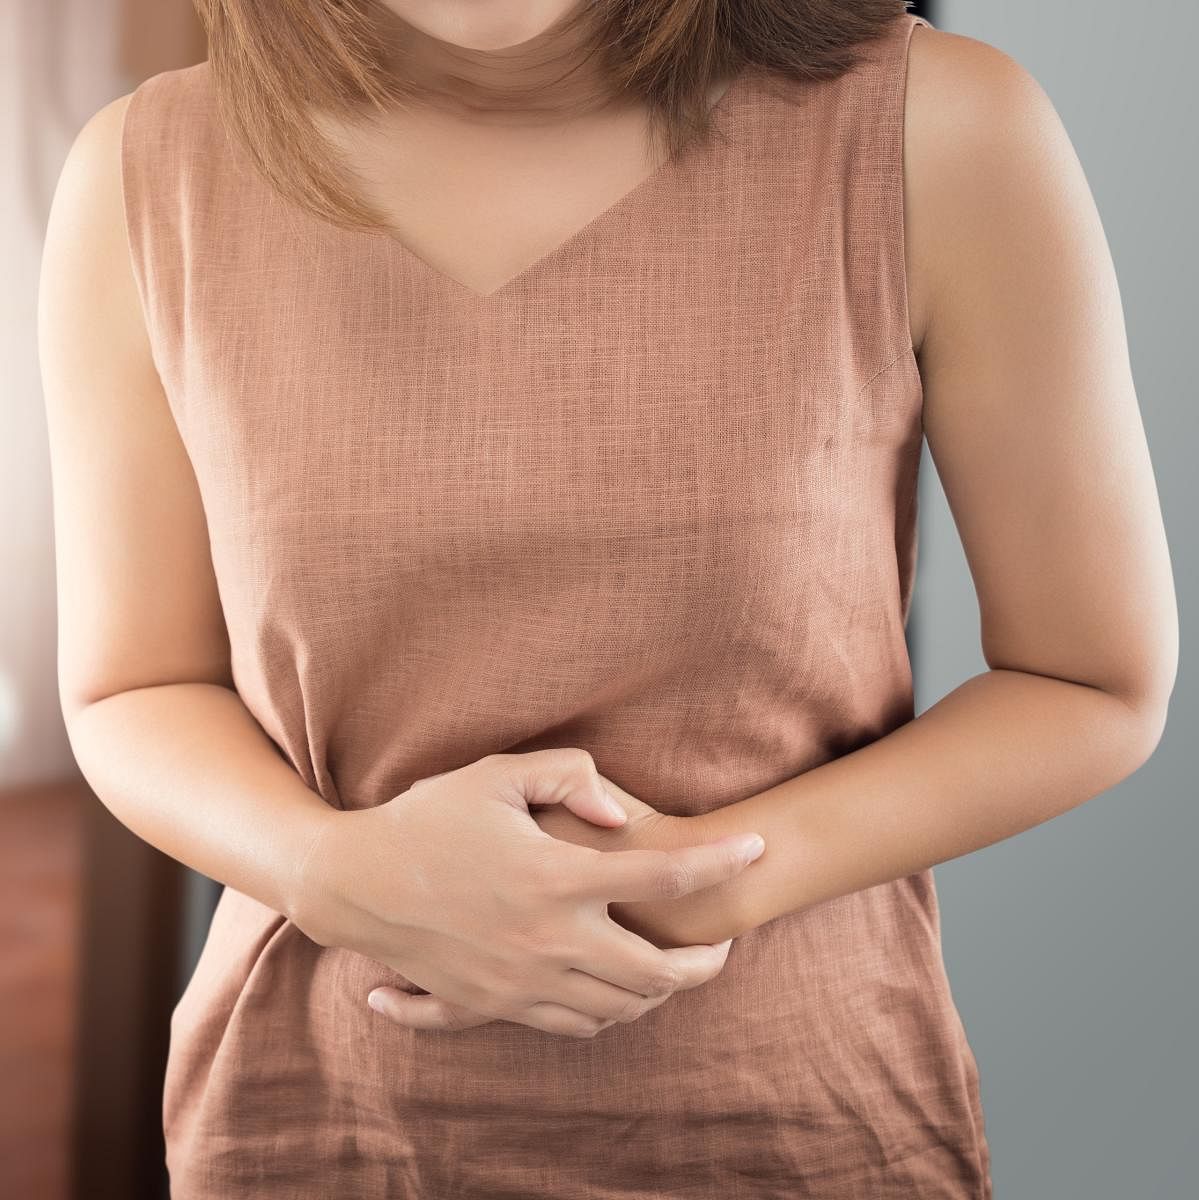 Researchers from Western Sydney University in Australia have found that, regardless of geographical location or economic status, more than two thirds (71 per cent) of young women globally suffer from painful periods. (DH Photo)